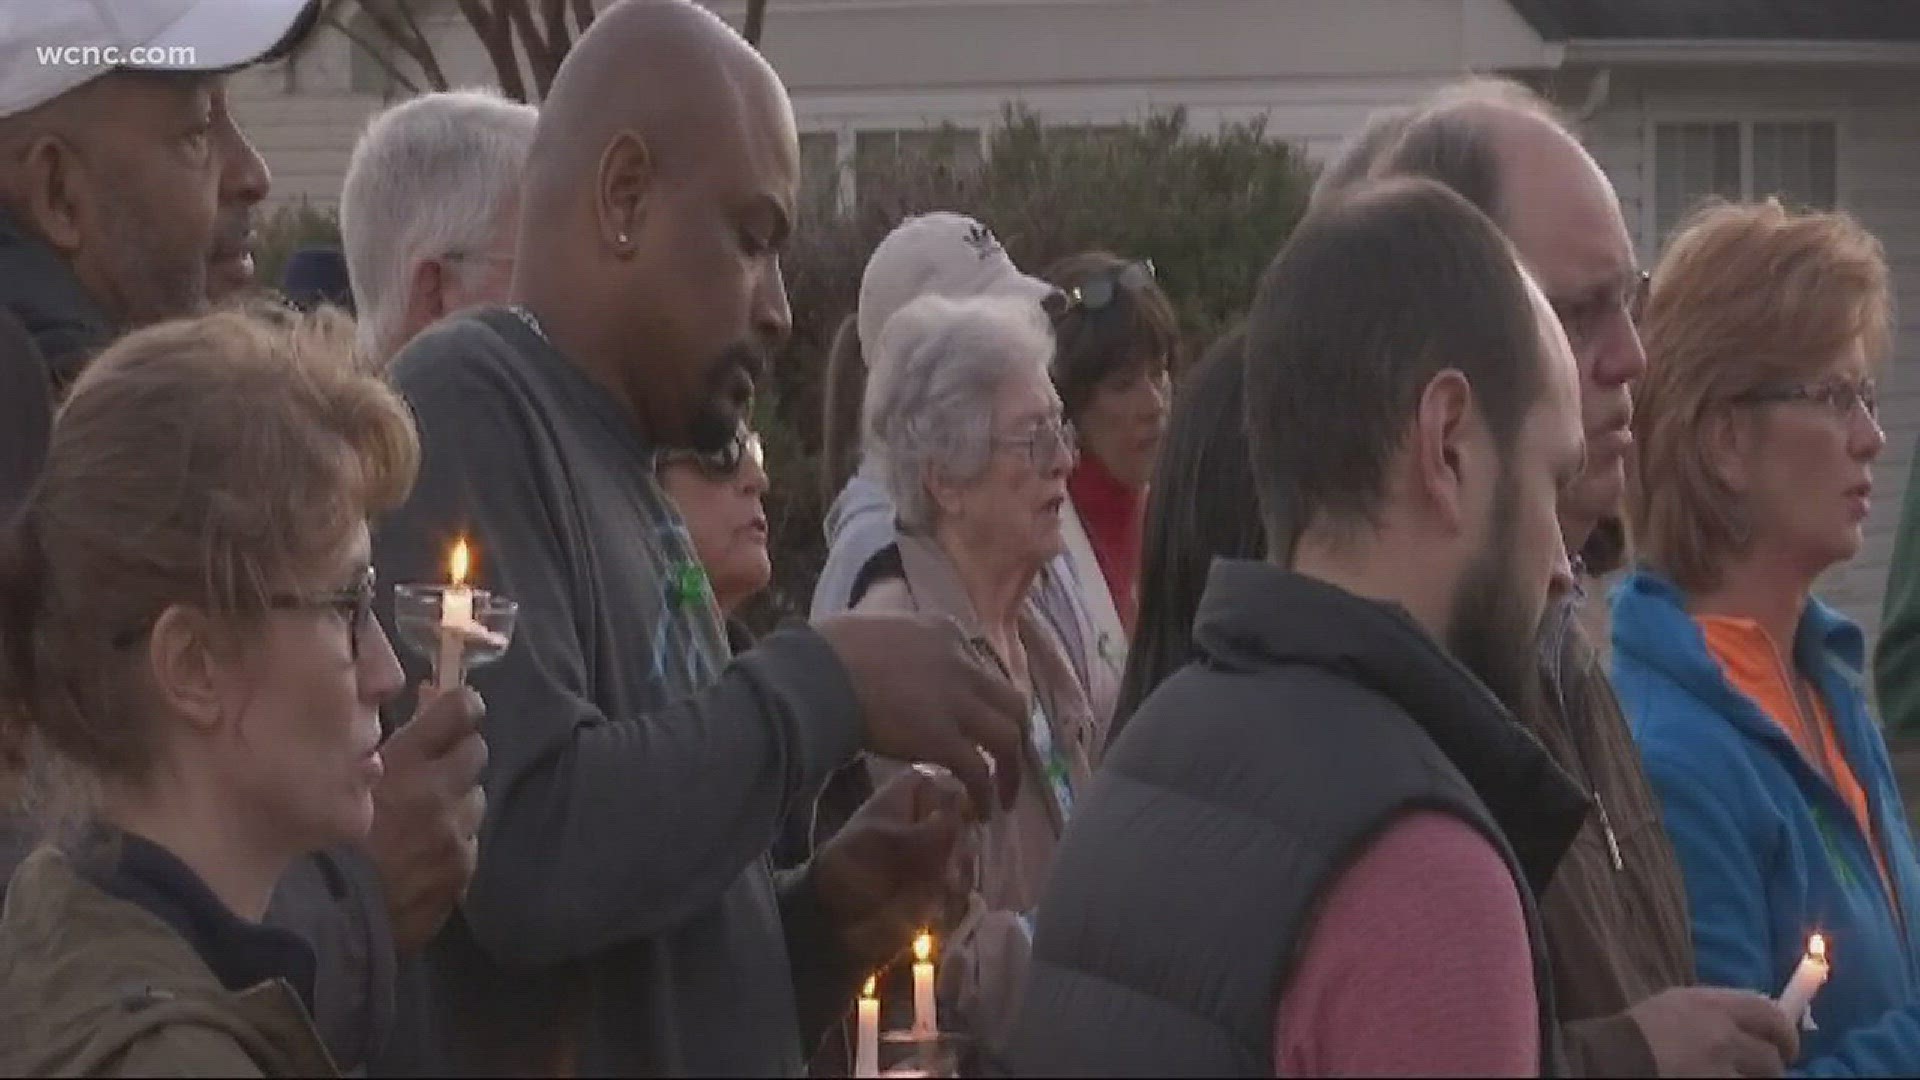 Candles lit up the night sky, as dozens showed love to a grieving family.